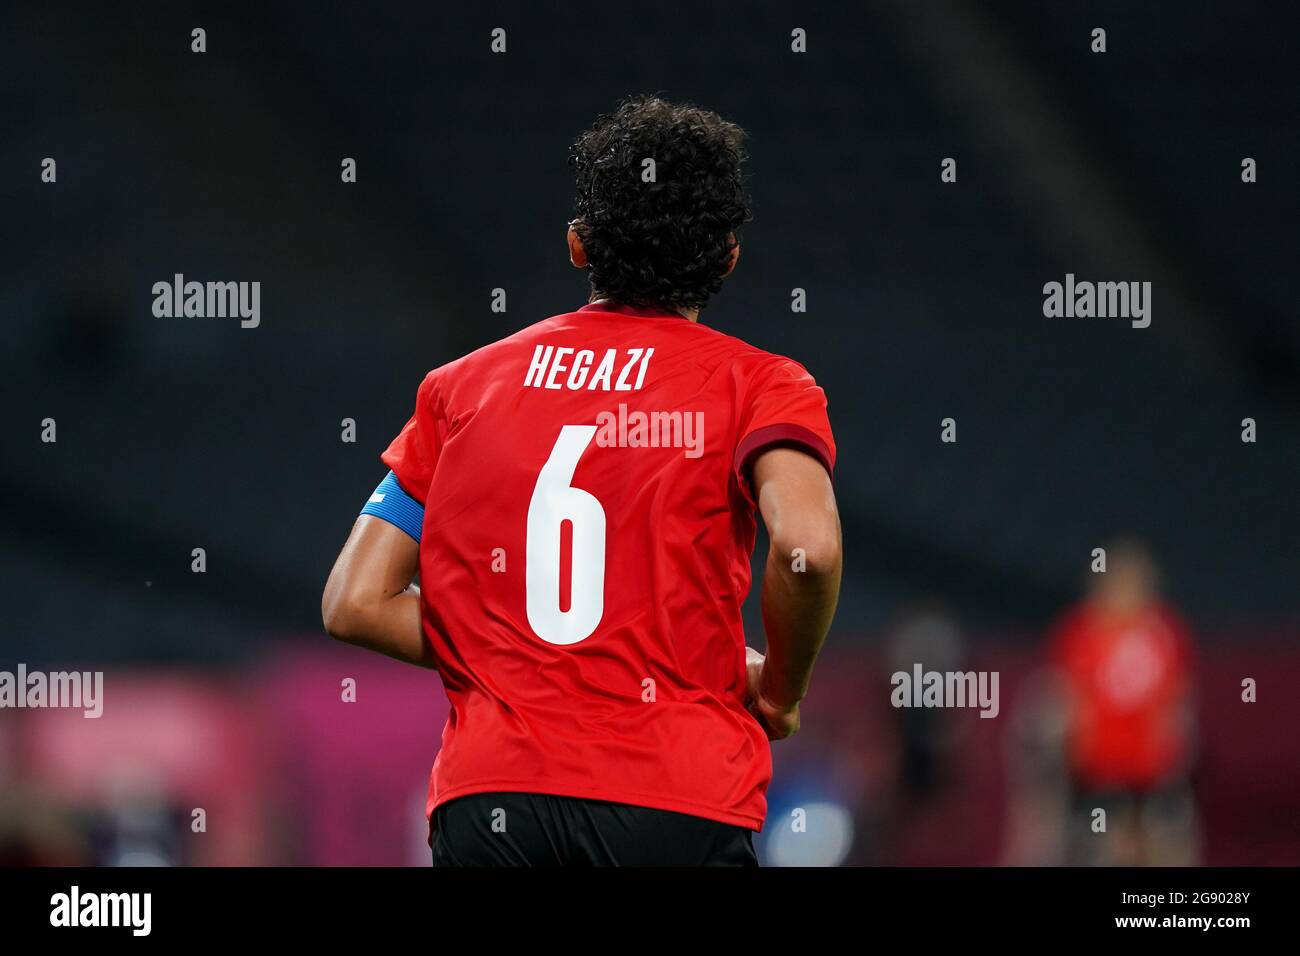 Sapporo, Japan. 22nd July, 2021. Captain Ahmed Hegazy (6 Egypt) in action during the Men's Olympic Football Tournament Tokyo 2020 match between Egypt and Spain at Sapporo Dome in Sapporo, Japan. Credit: SPP Sport Press Photo. /Alamy Live News Stock Photo